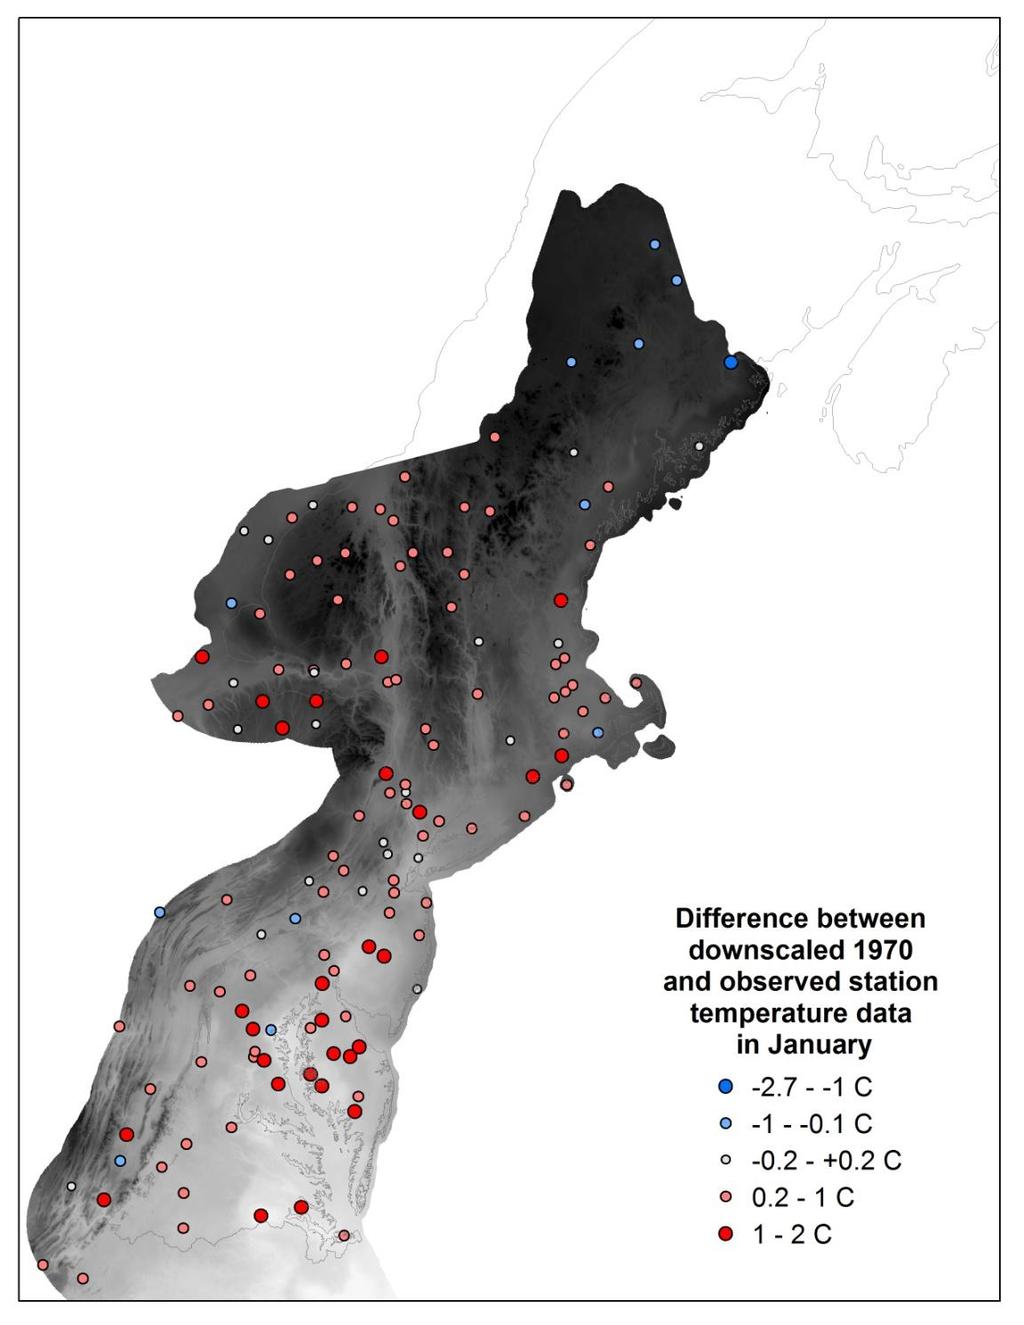 Figure 9. Spatial distribution of residual differences between downscaled temperature projections in January for the 1970 timestep and observed weather station data across the NALCC.